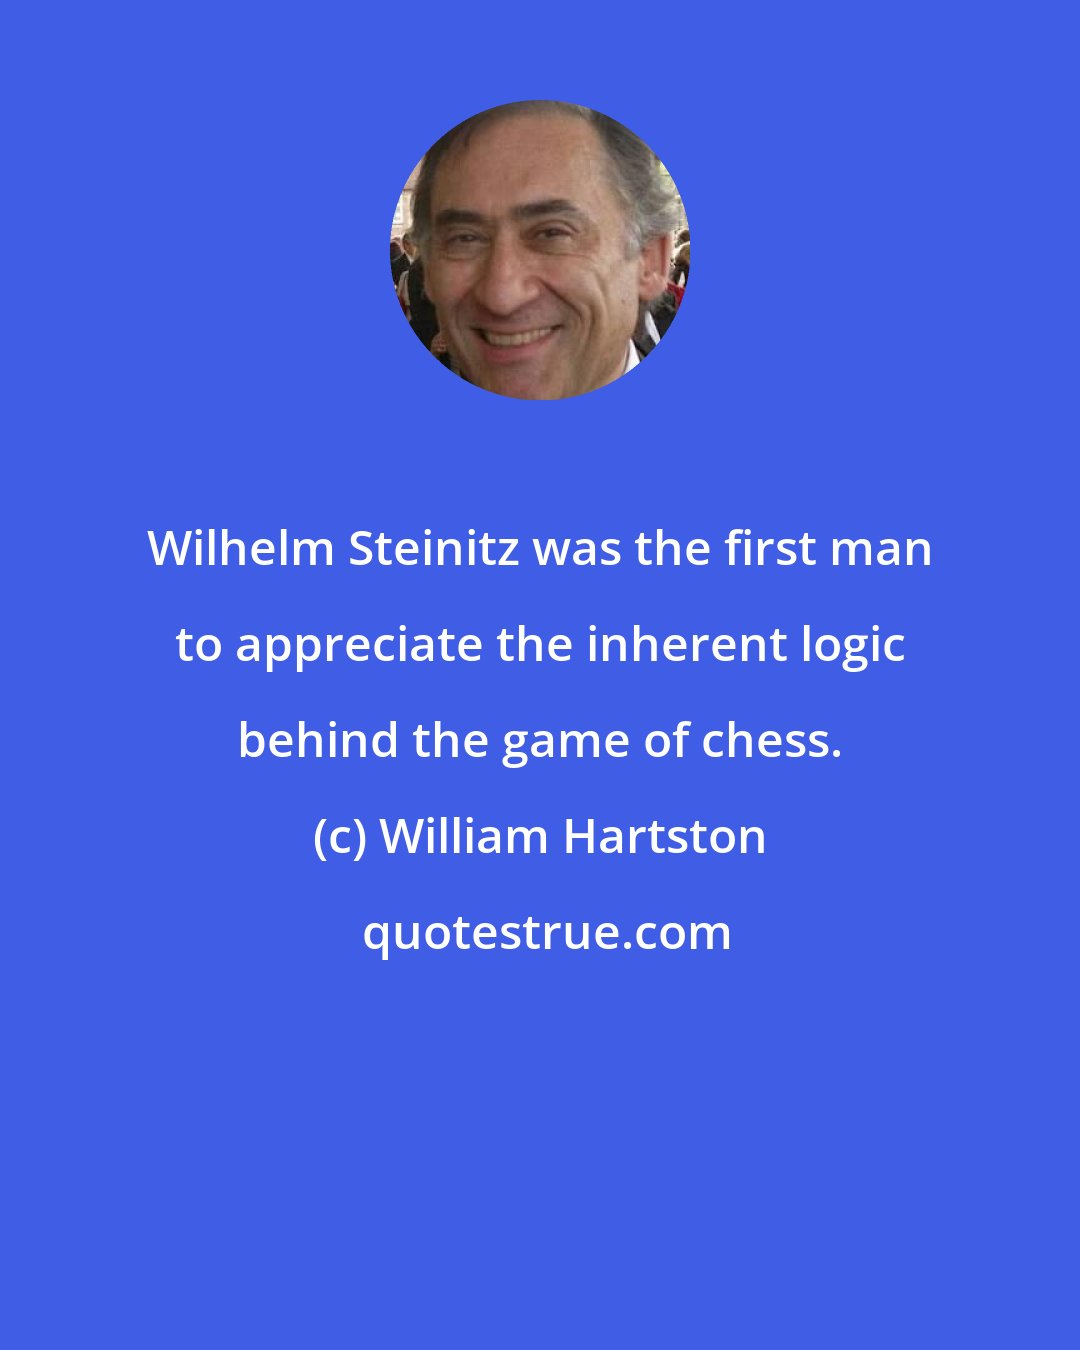 William Hartston: Wilhelm Steinitz was the first man to appreciate the inherent logic behind the game of chess.